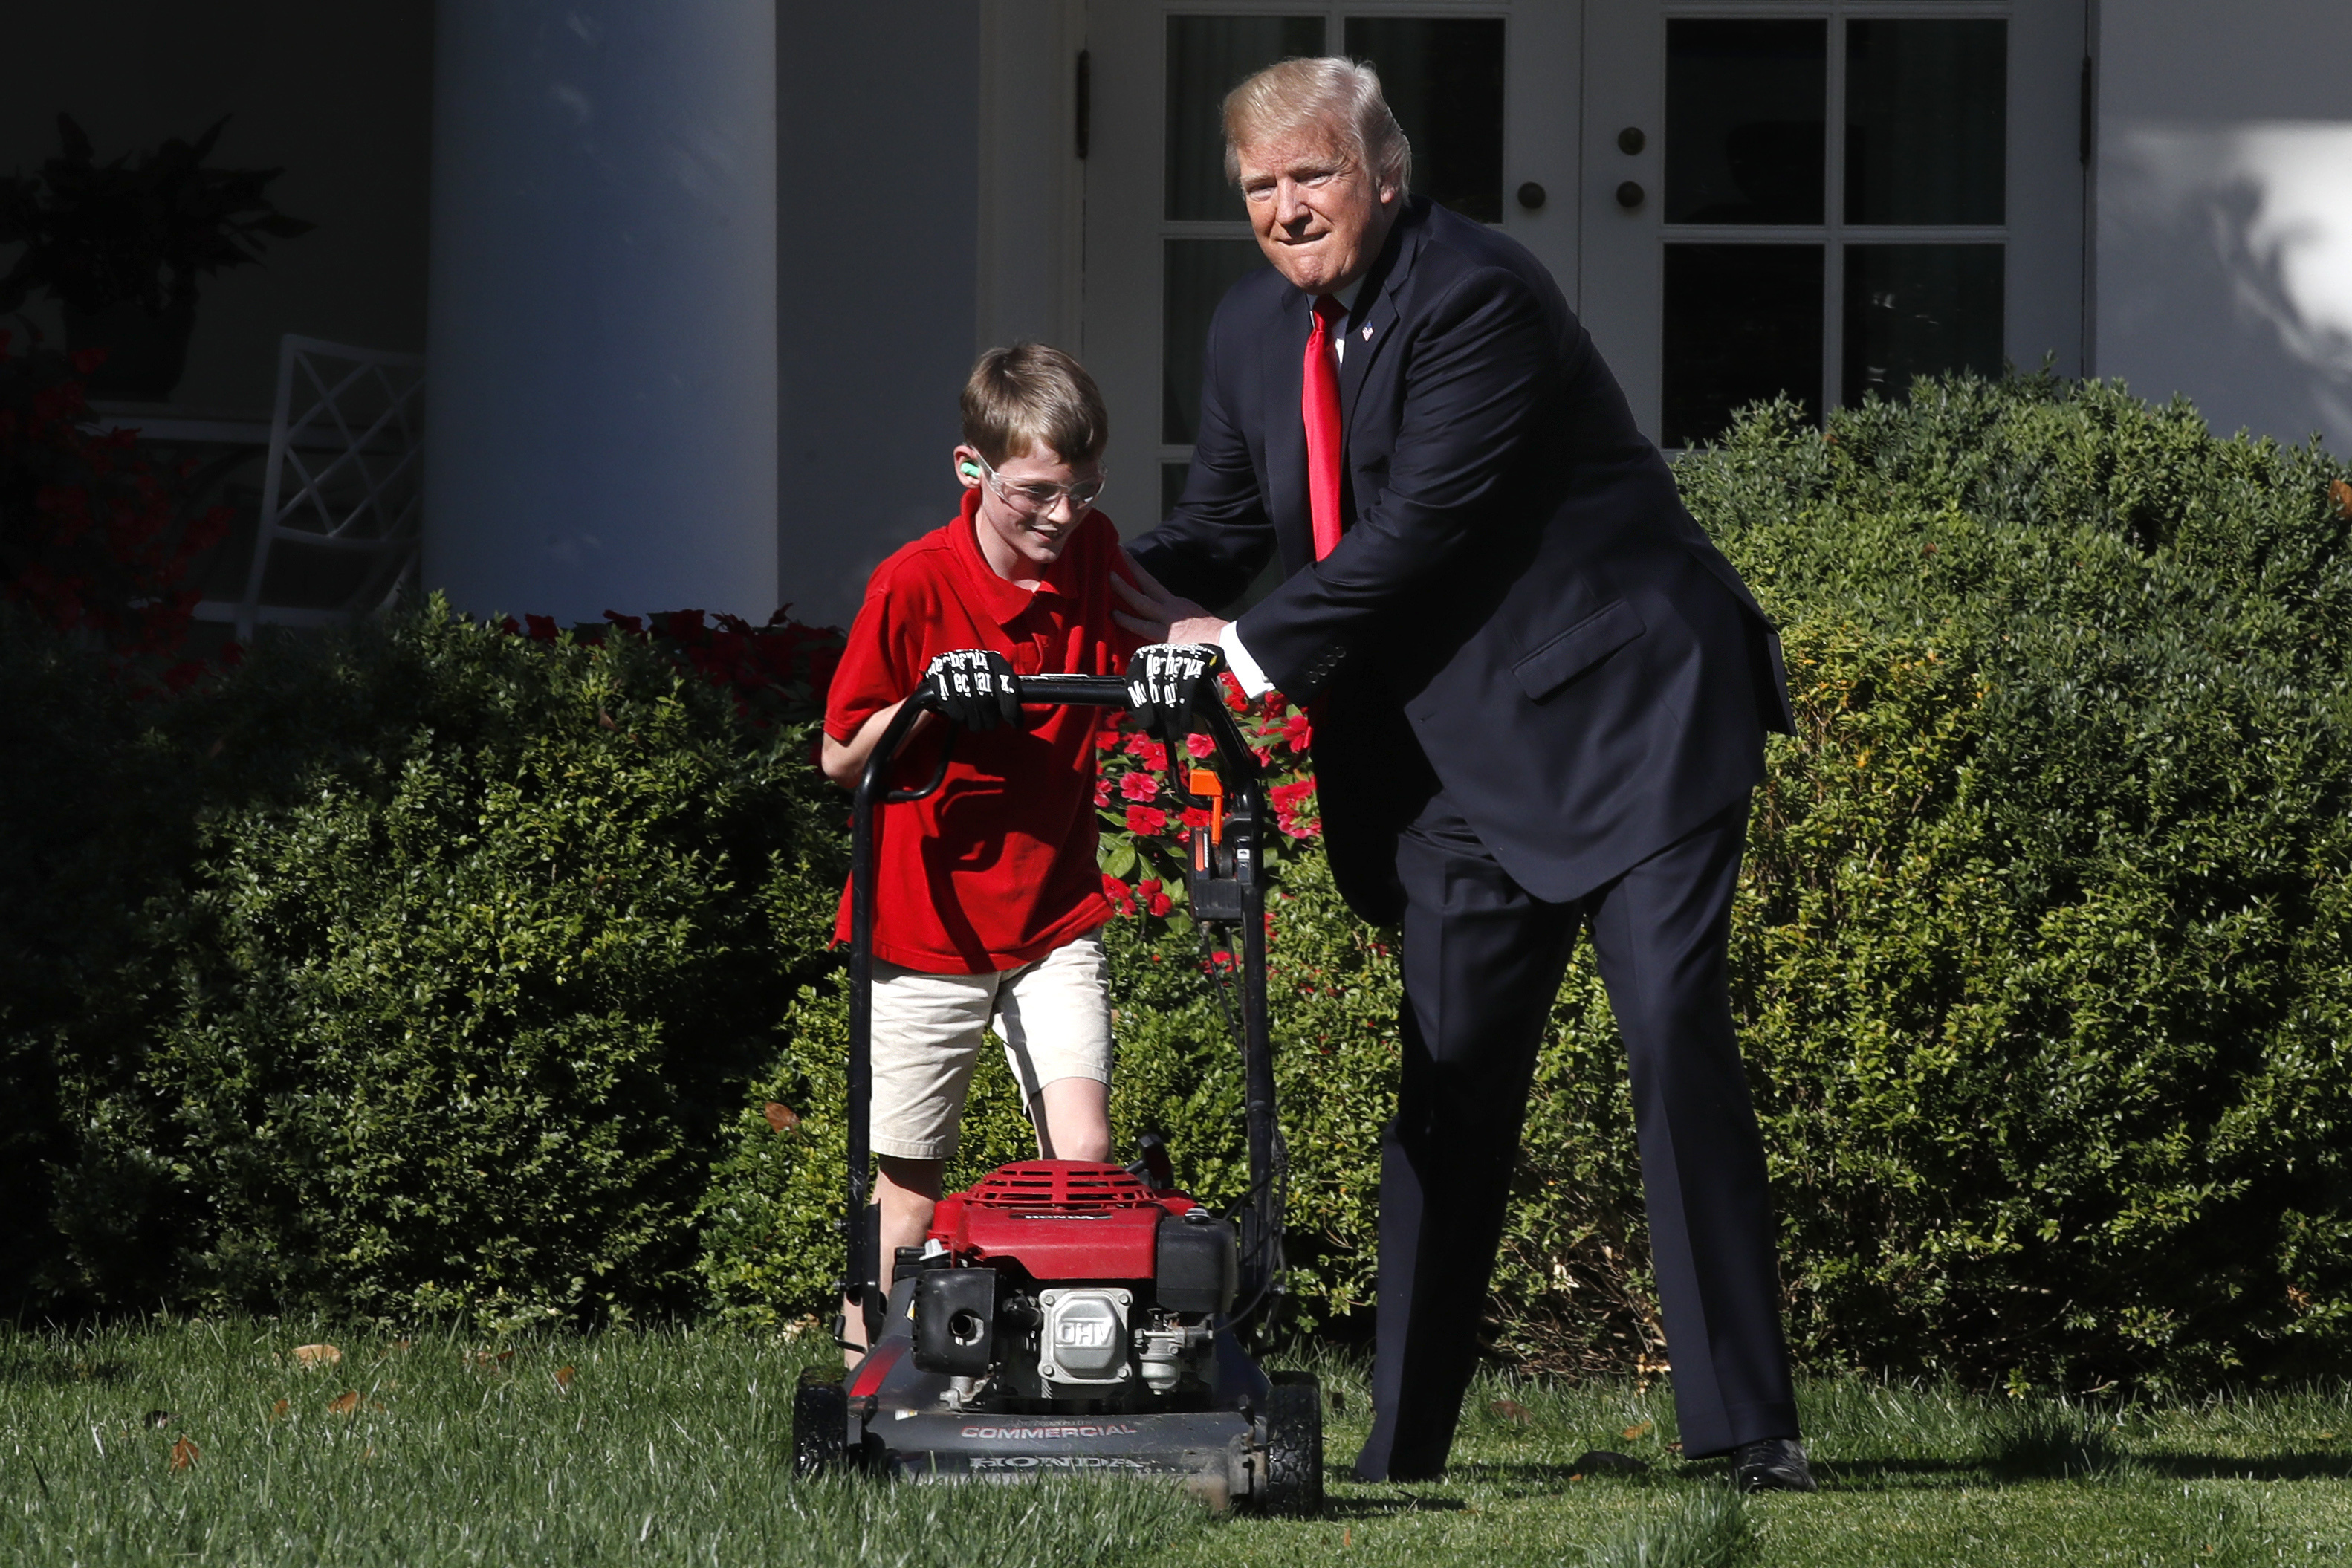 Meet the 11-Year-Old Who Mowed the White House Lawn for Free